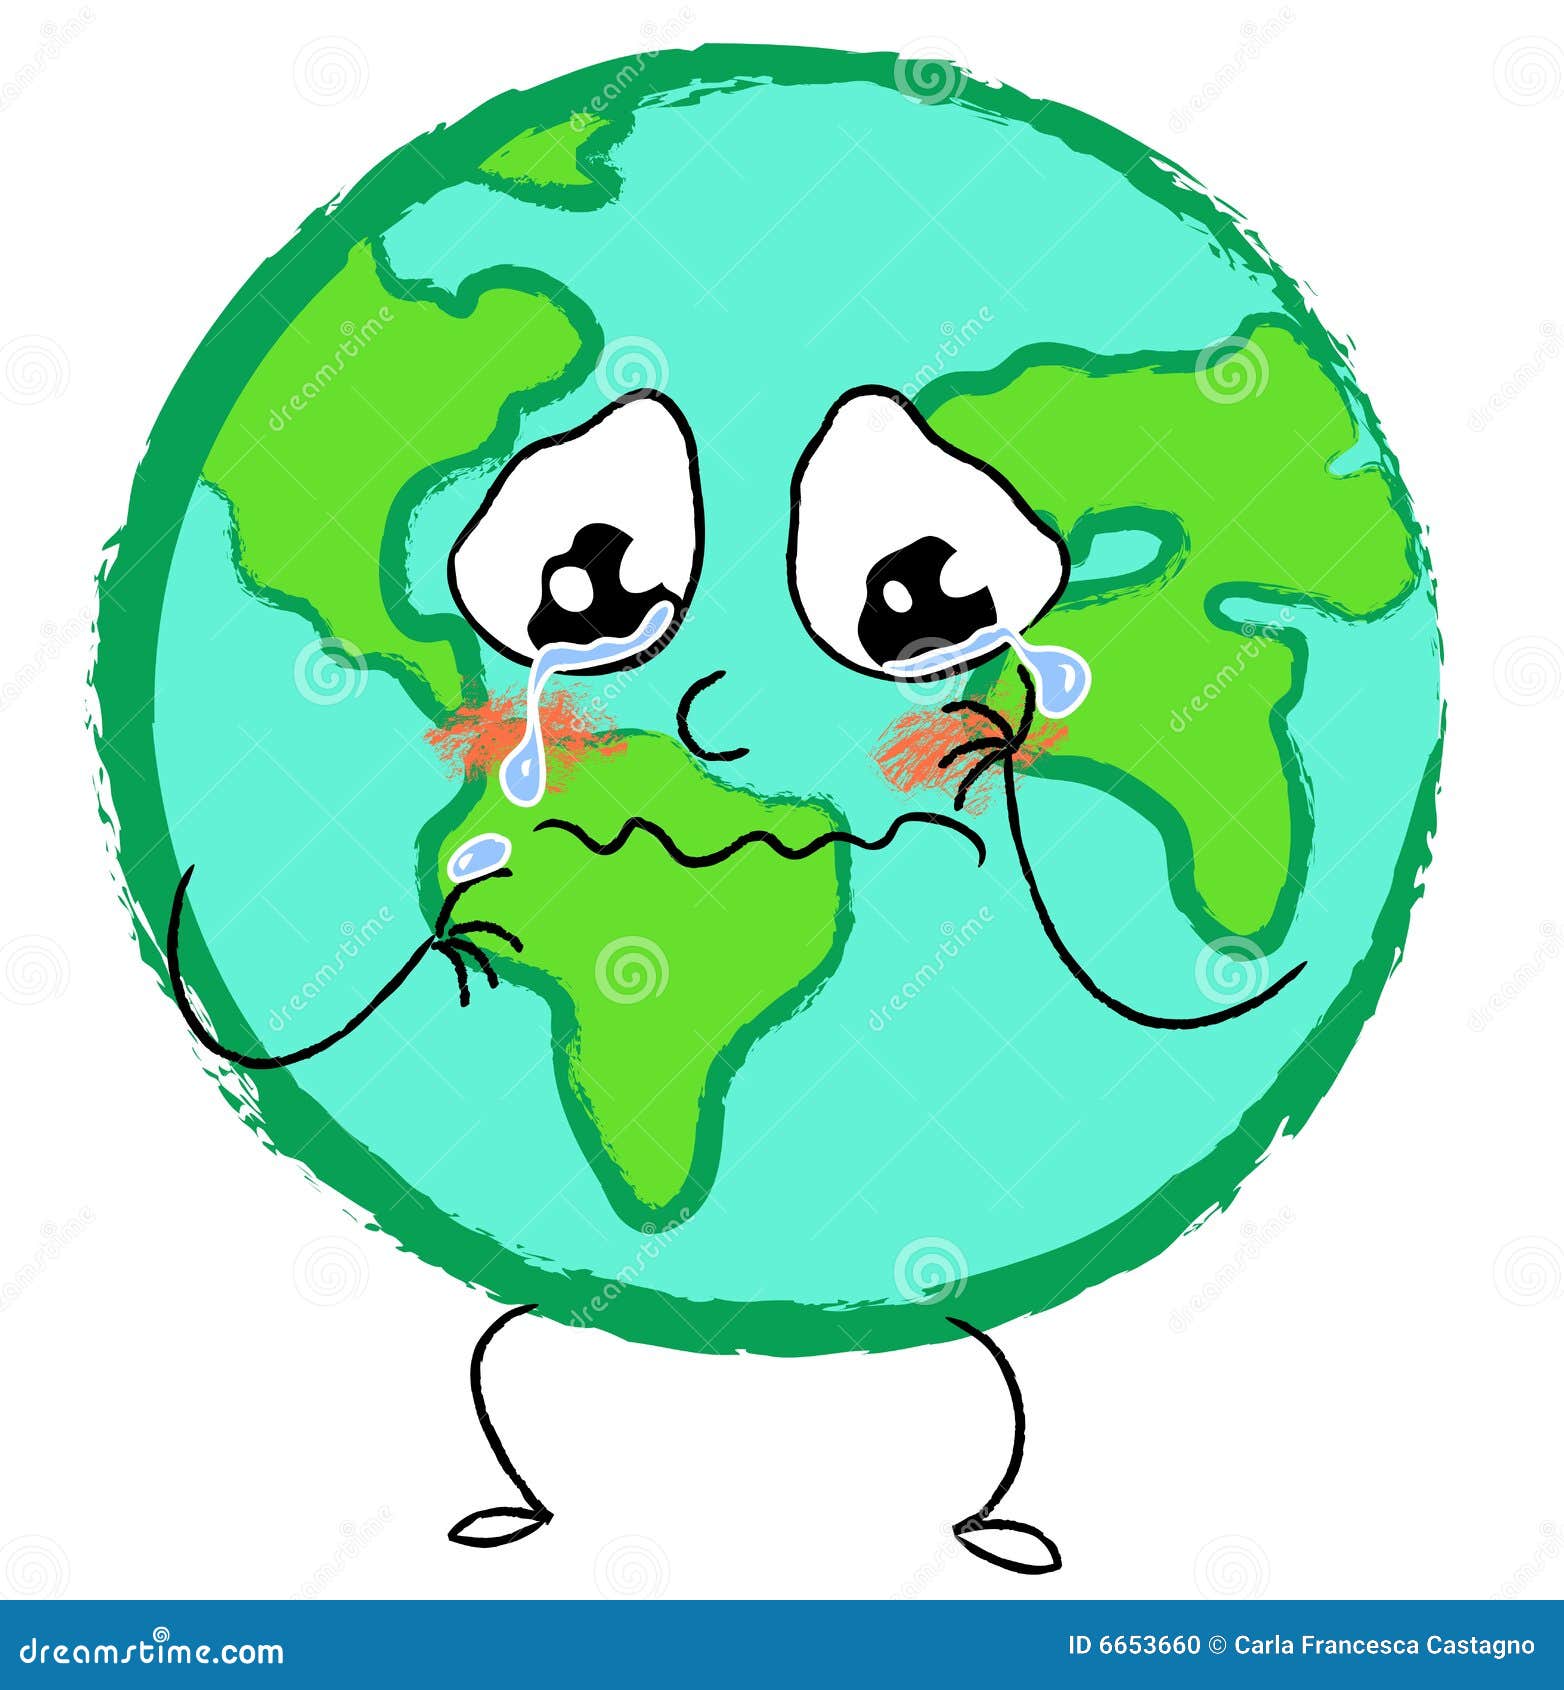 clipart of crying earth - photo #5